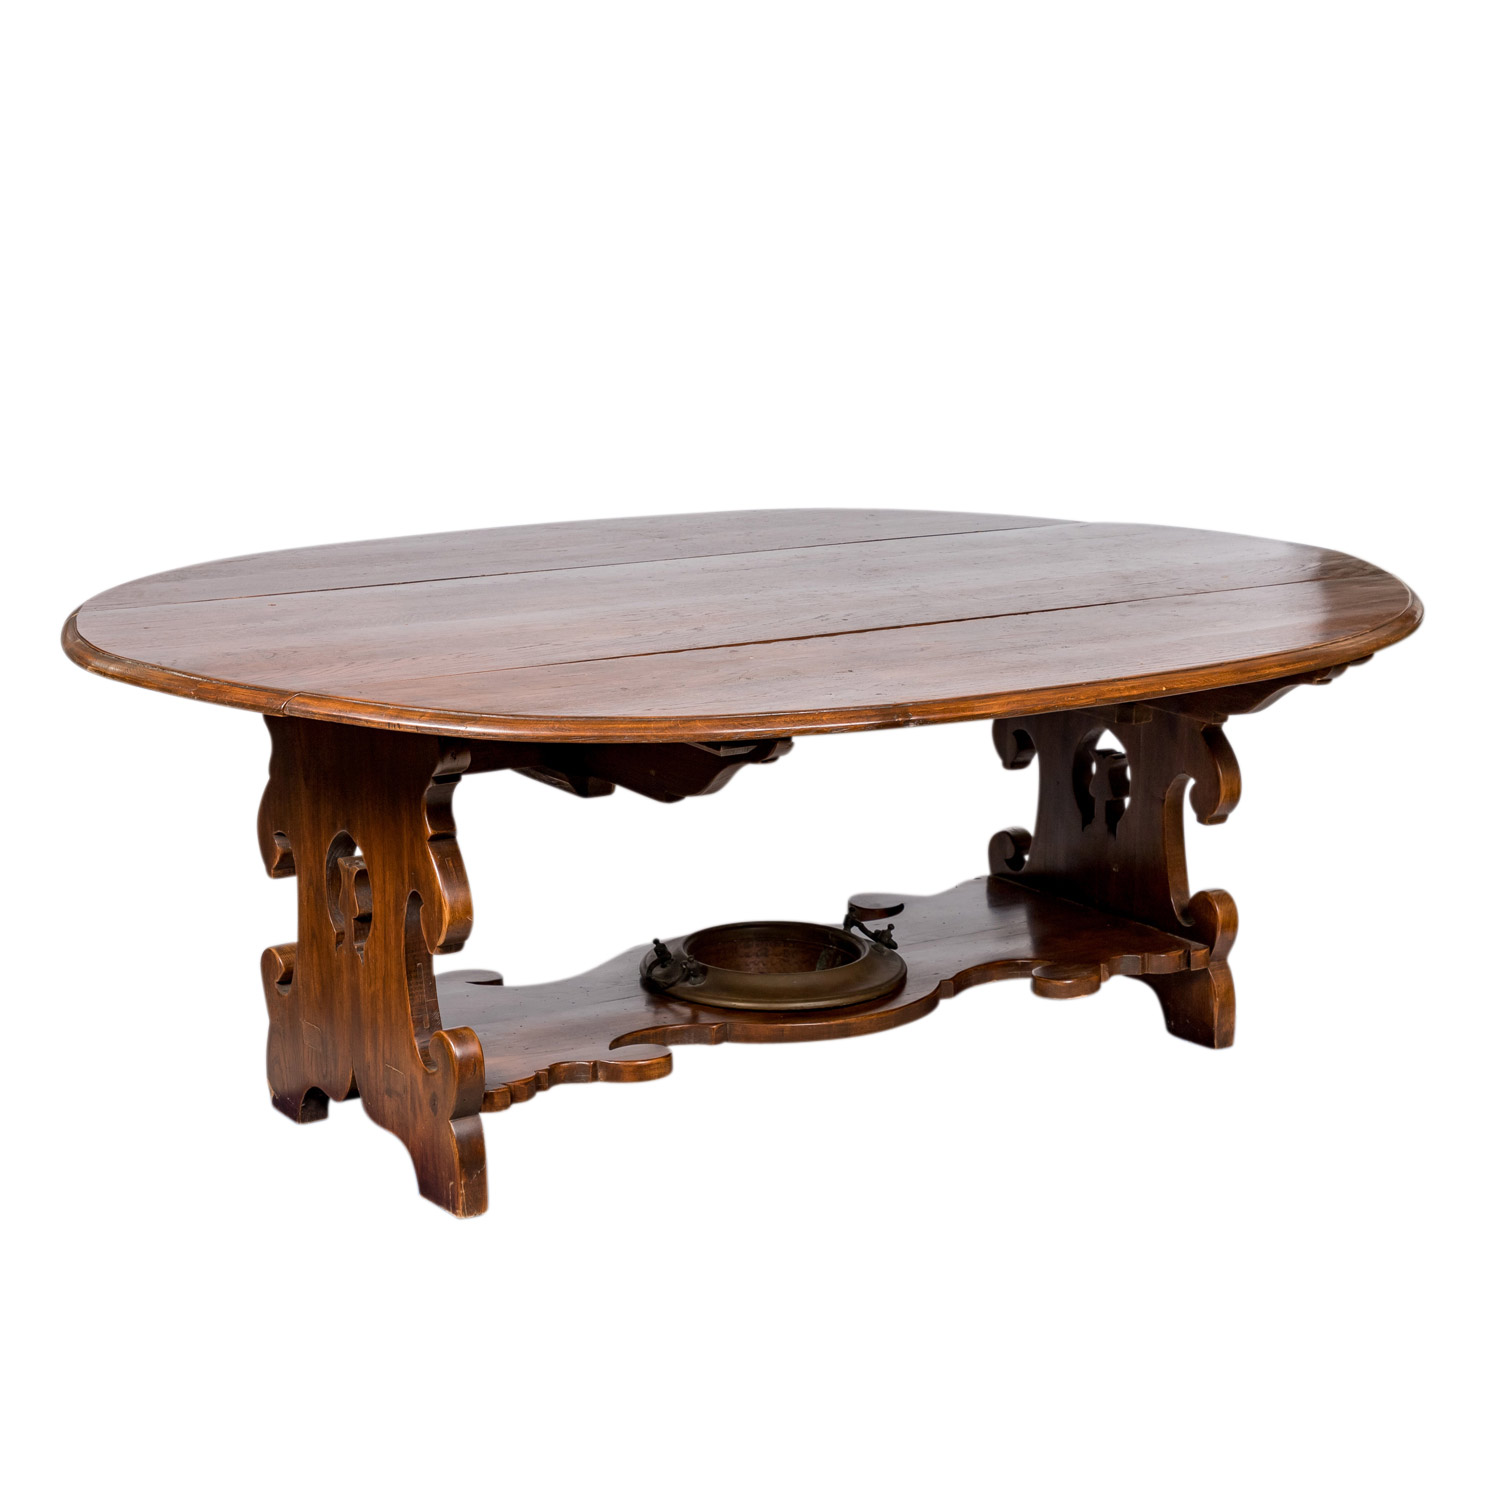 EPPLI | LARGE CLAPPABLE TABLE | purchase online